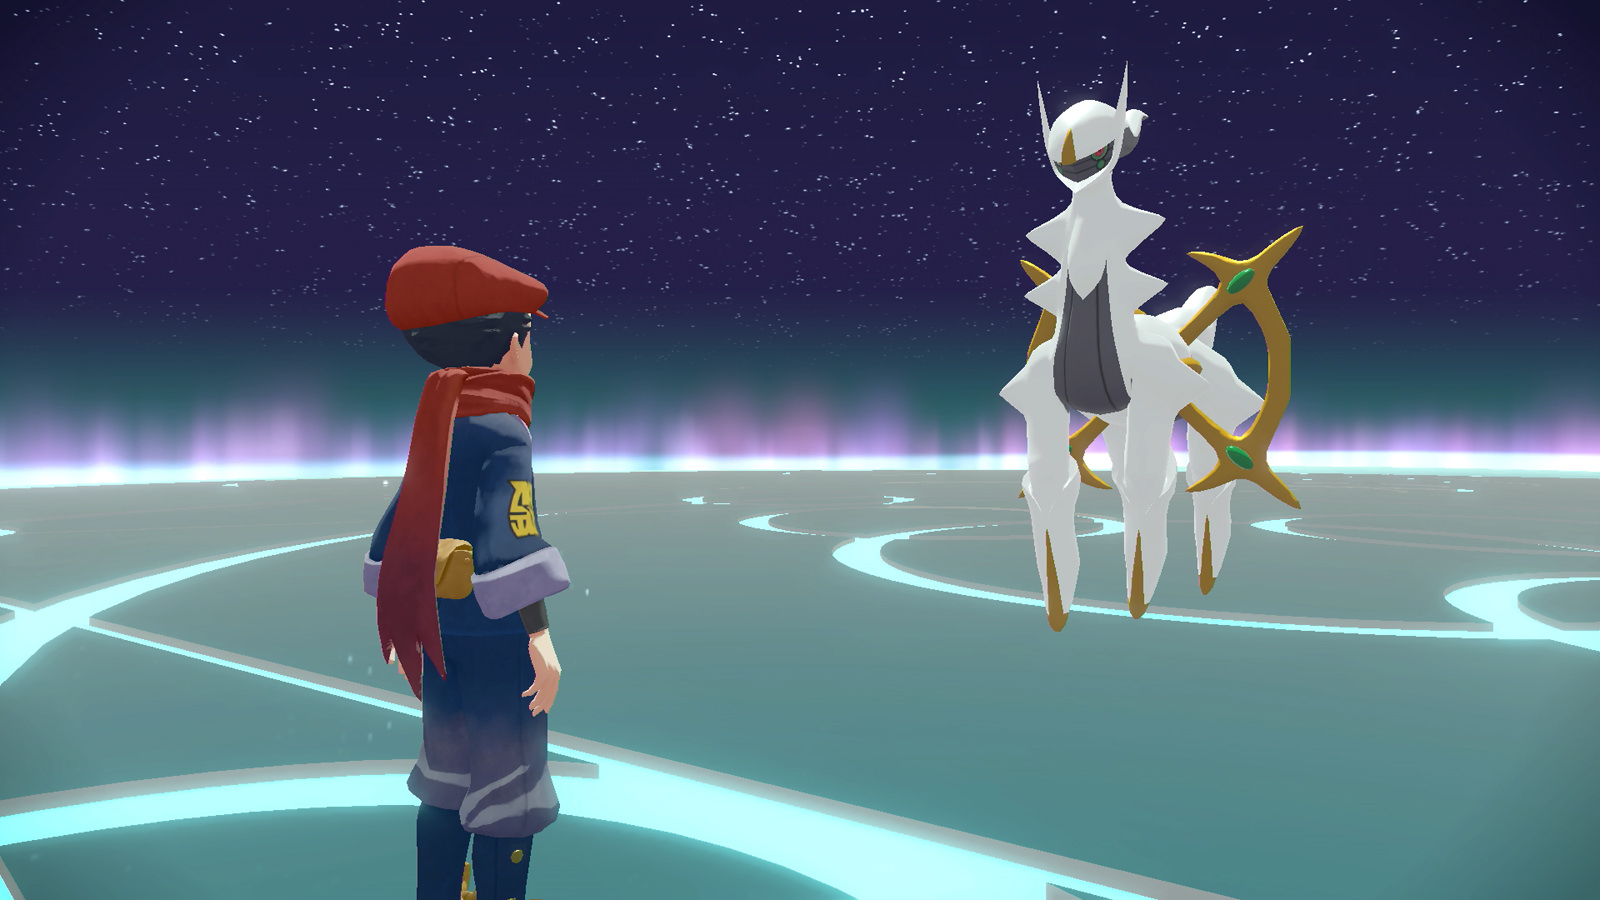 Pokemon Legends: Arceus 1.1.0 update is now available